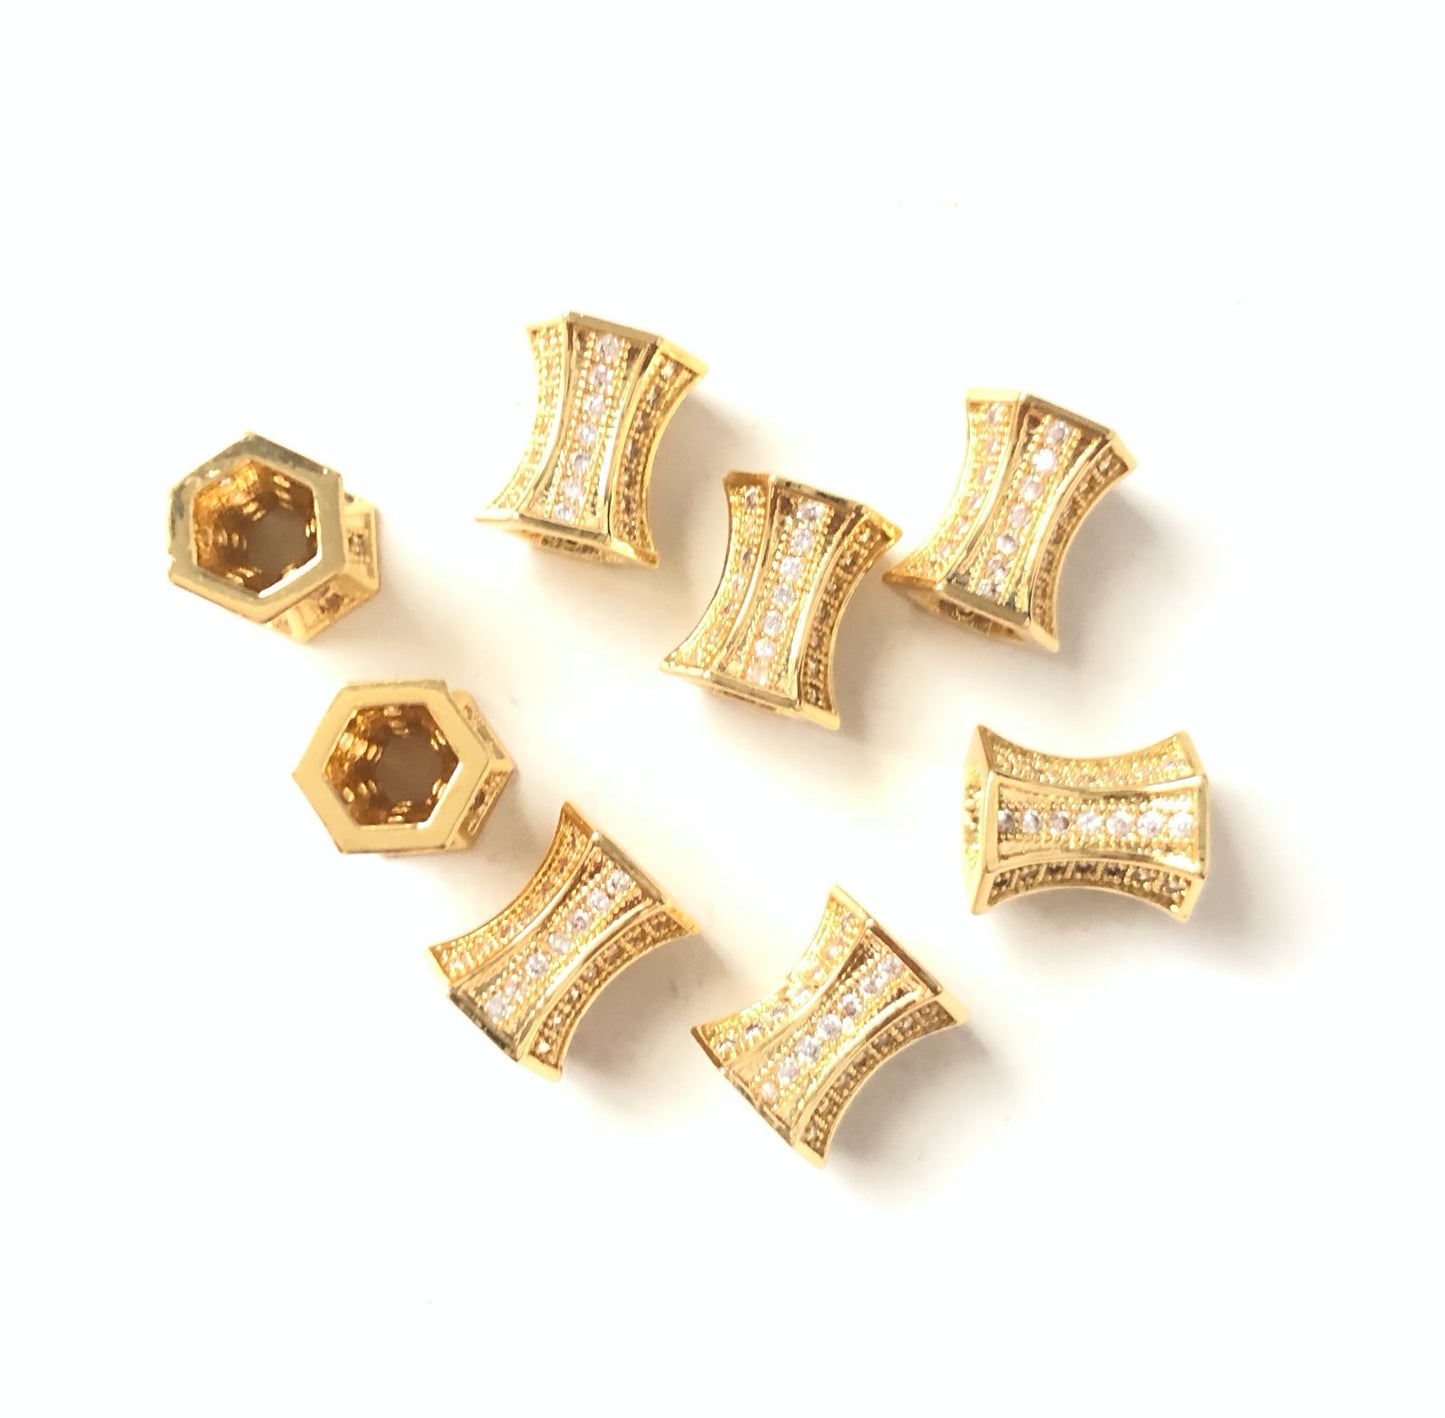 20pcs/lot 9.7*8.7mm CZ Paved Hourglass Spacers Gold CZ Paved Spacers Hourglass Beads Charms Beads Beyond